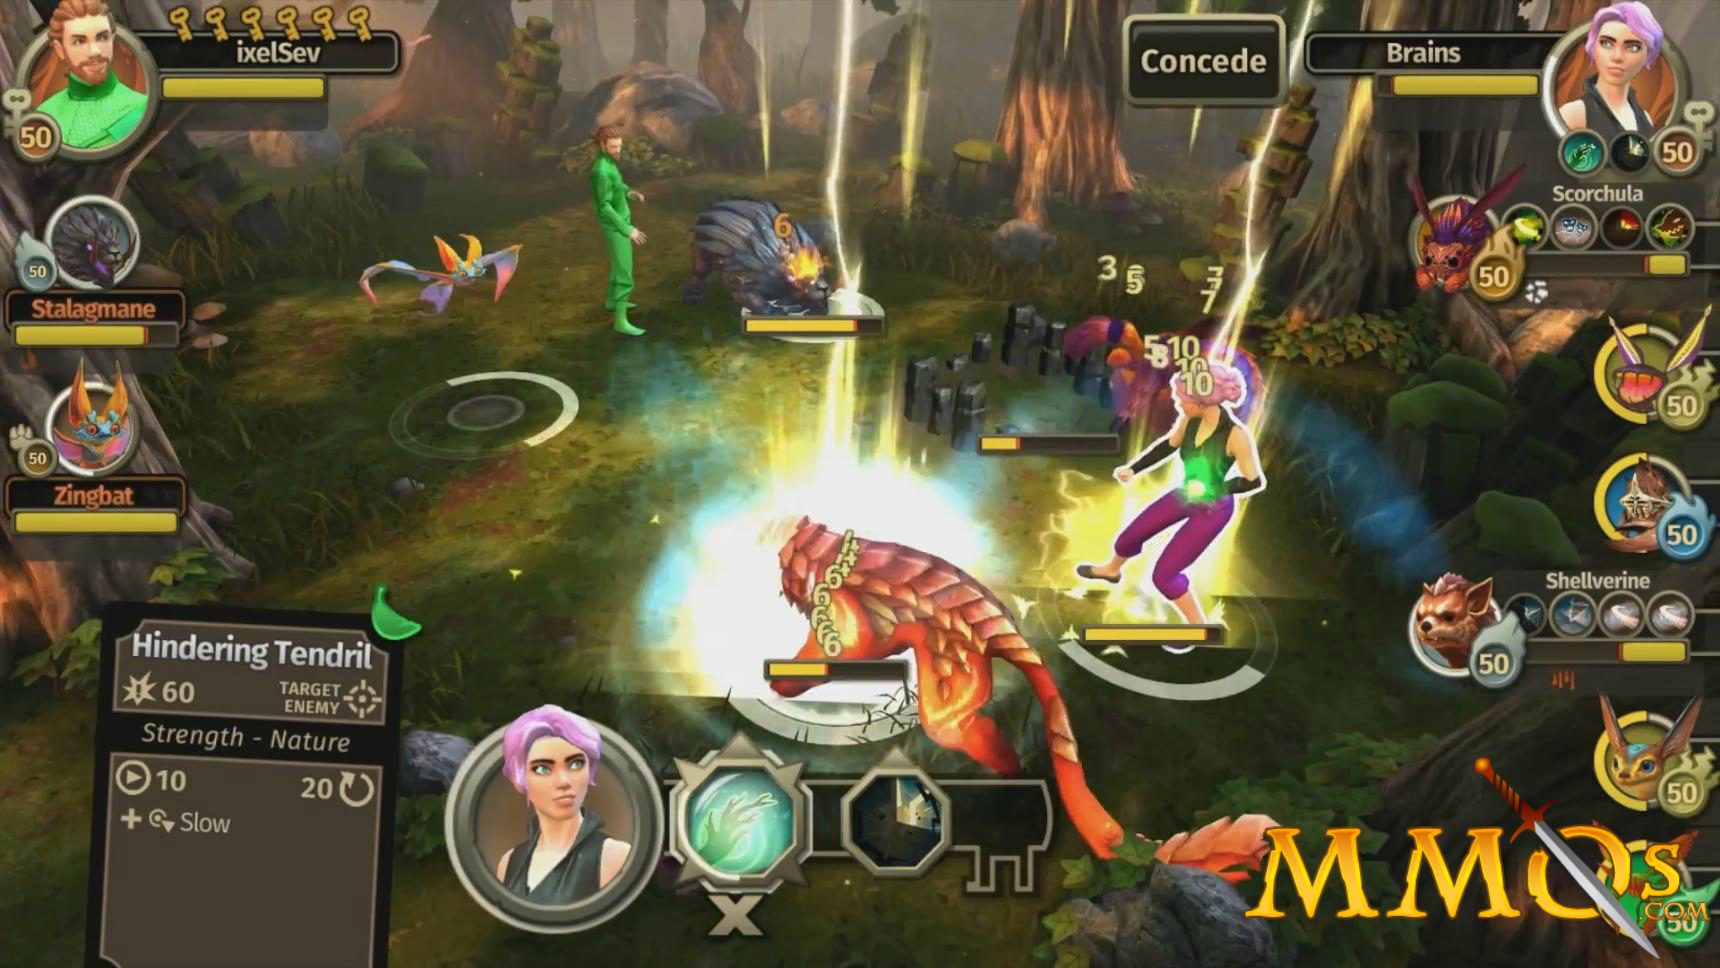 Moonrise wants to be a PC Pokemon MMO